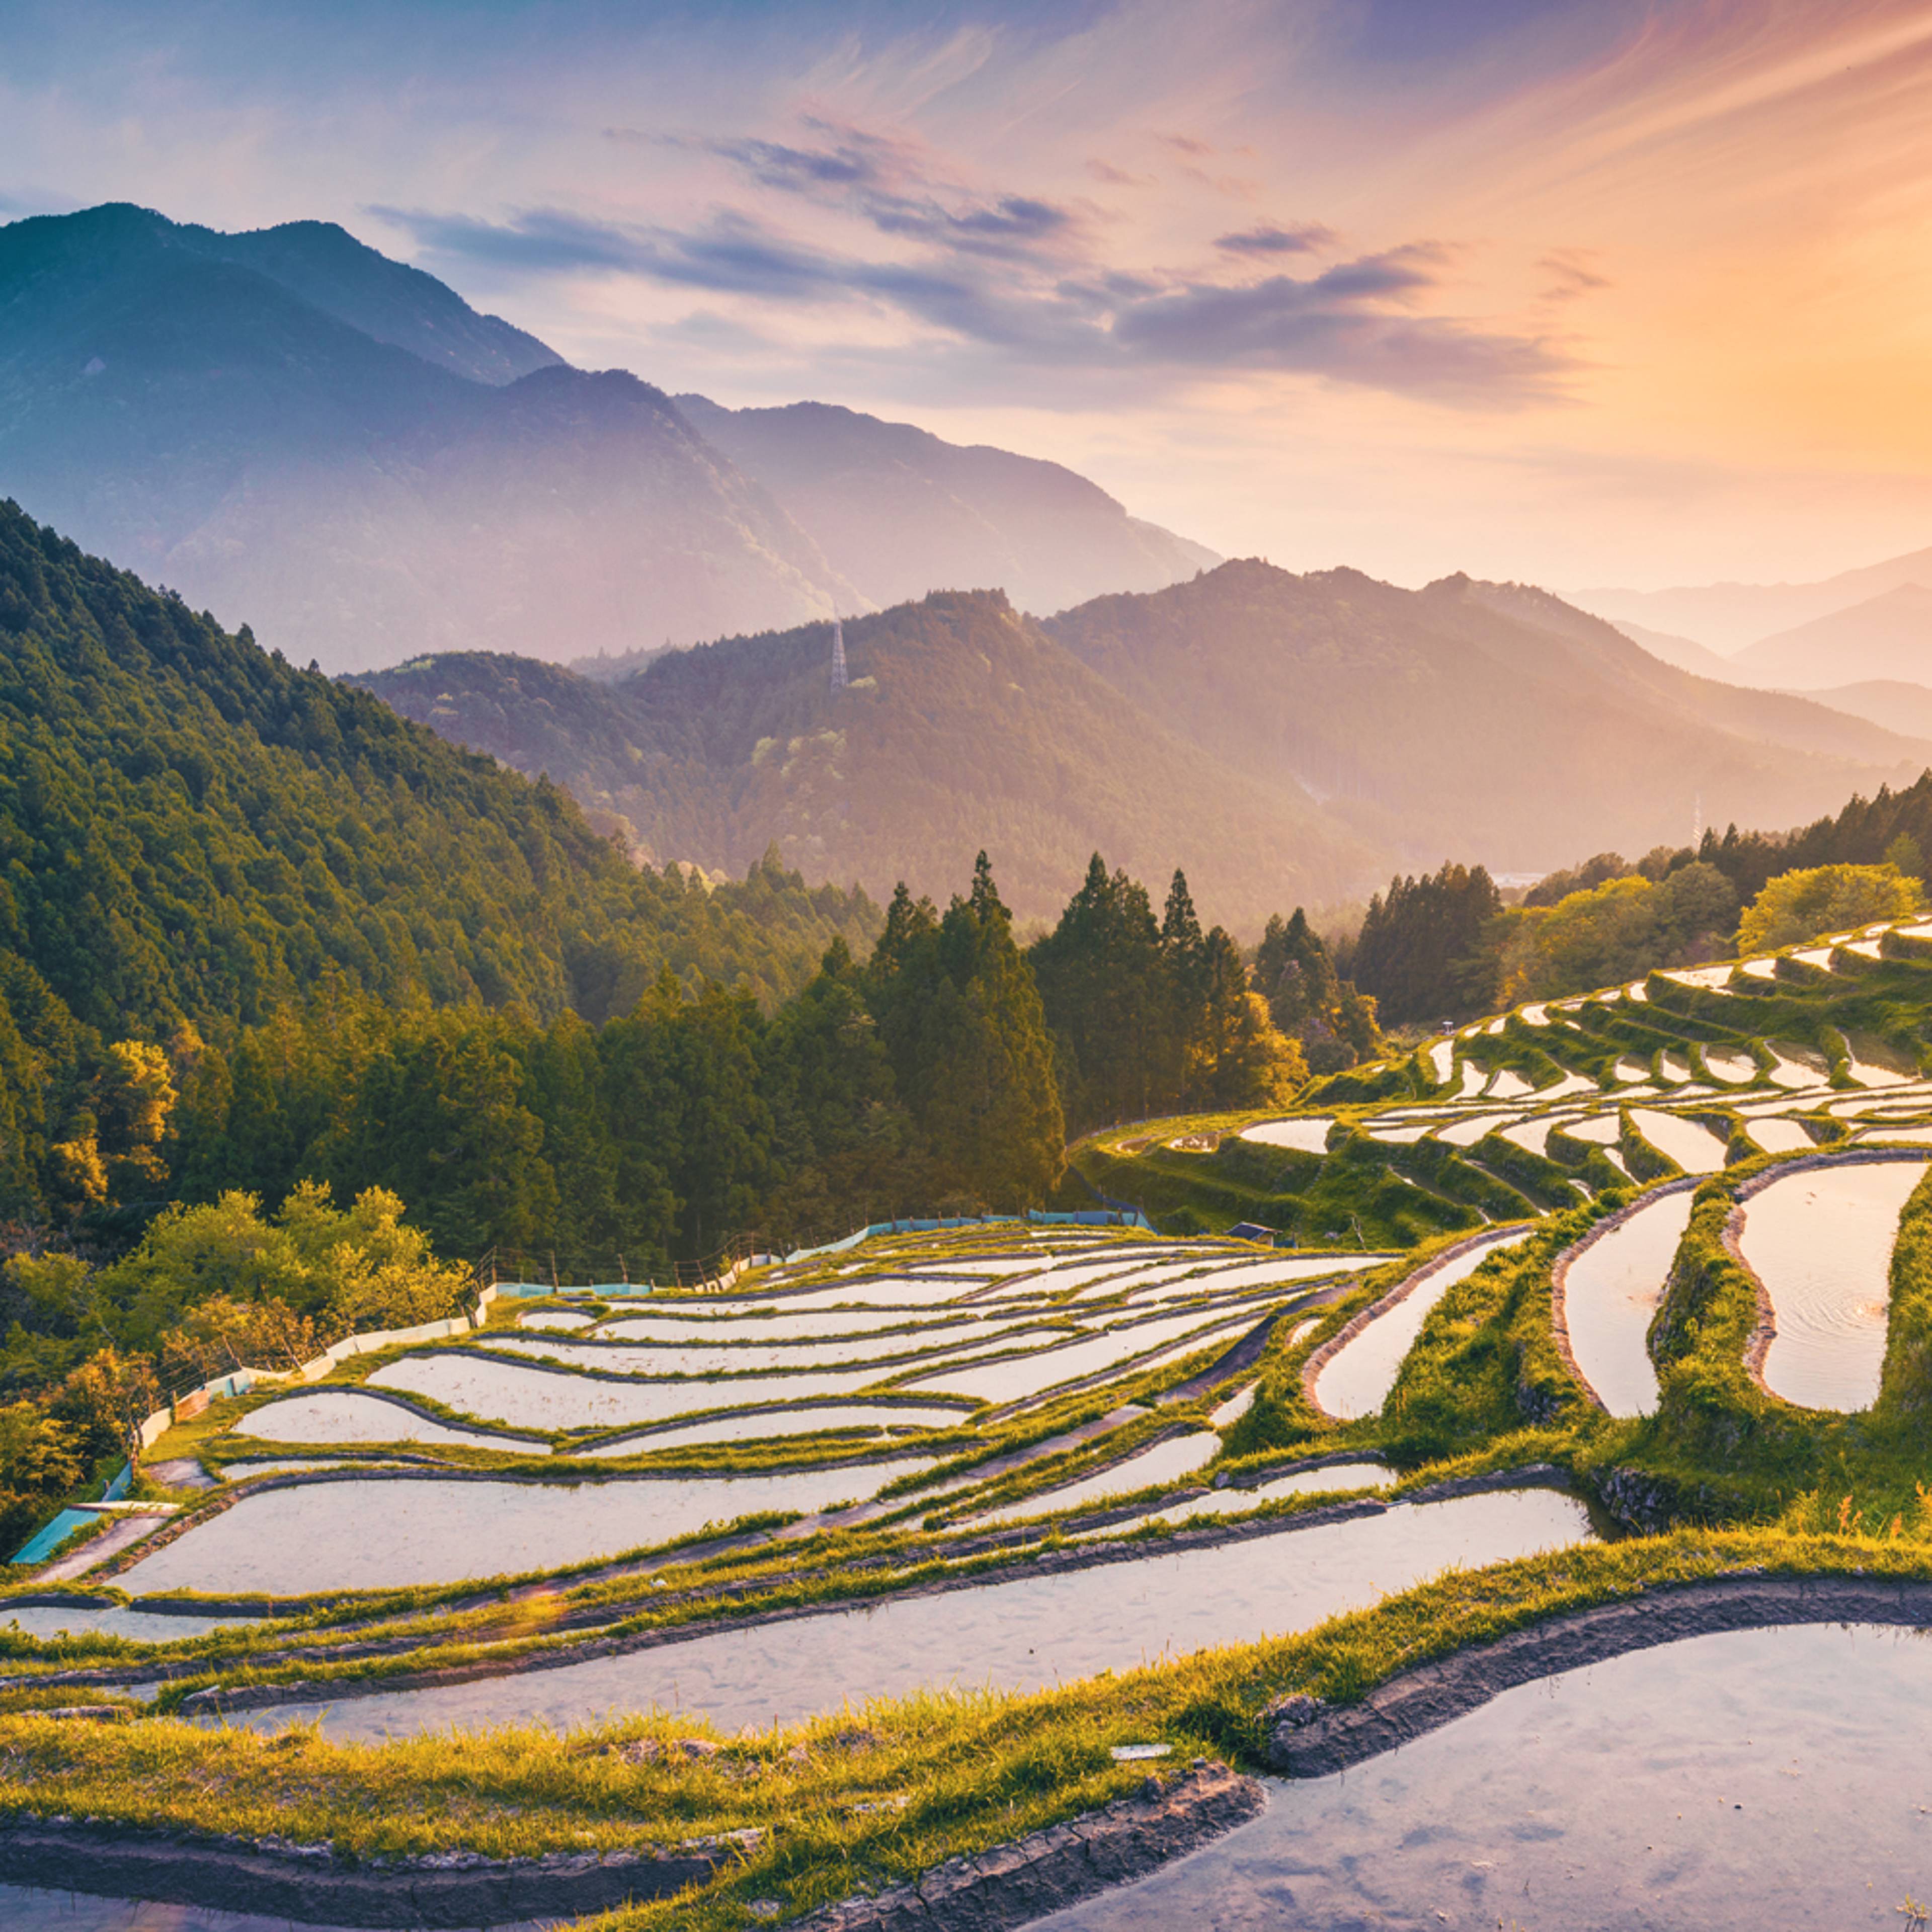 Experience Japan off-the-beaten-track with a local expert